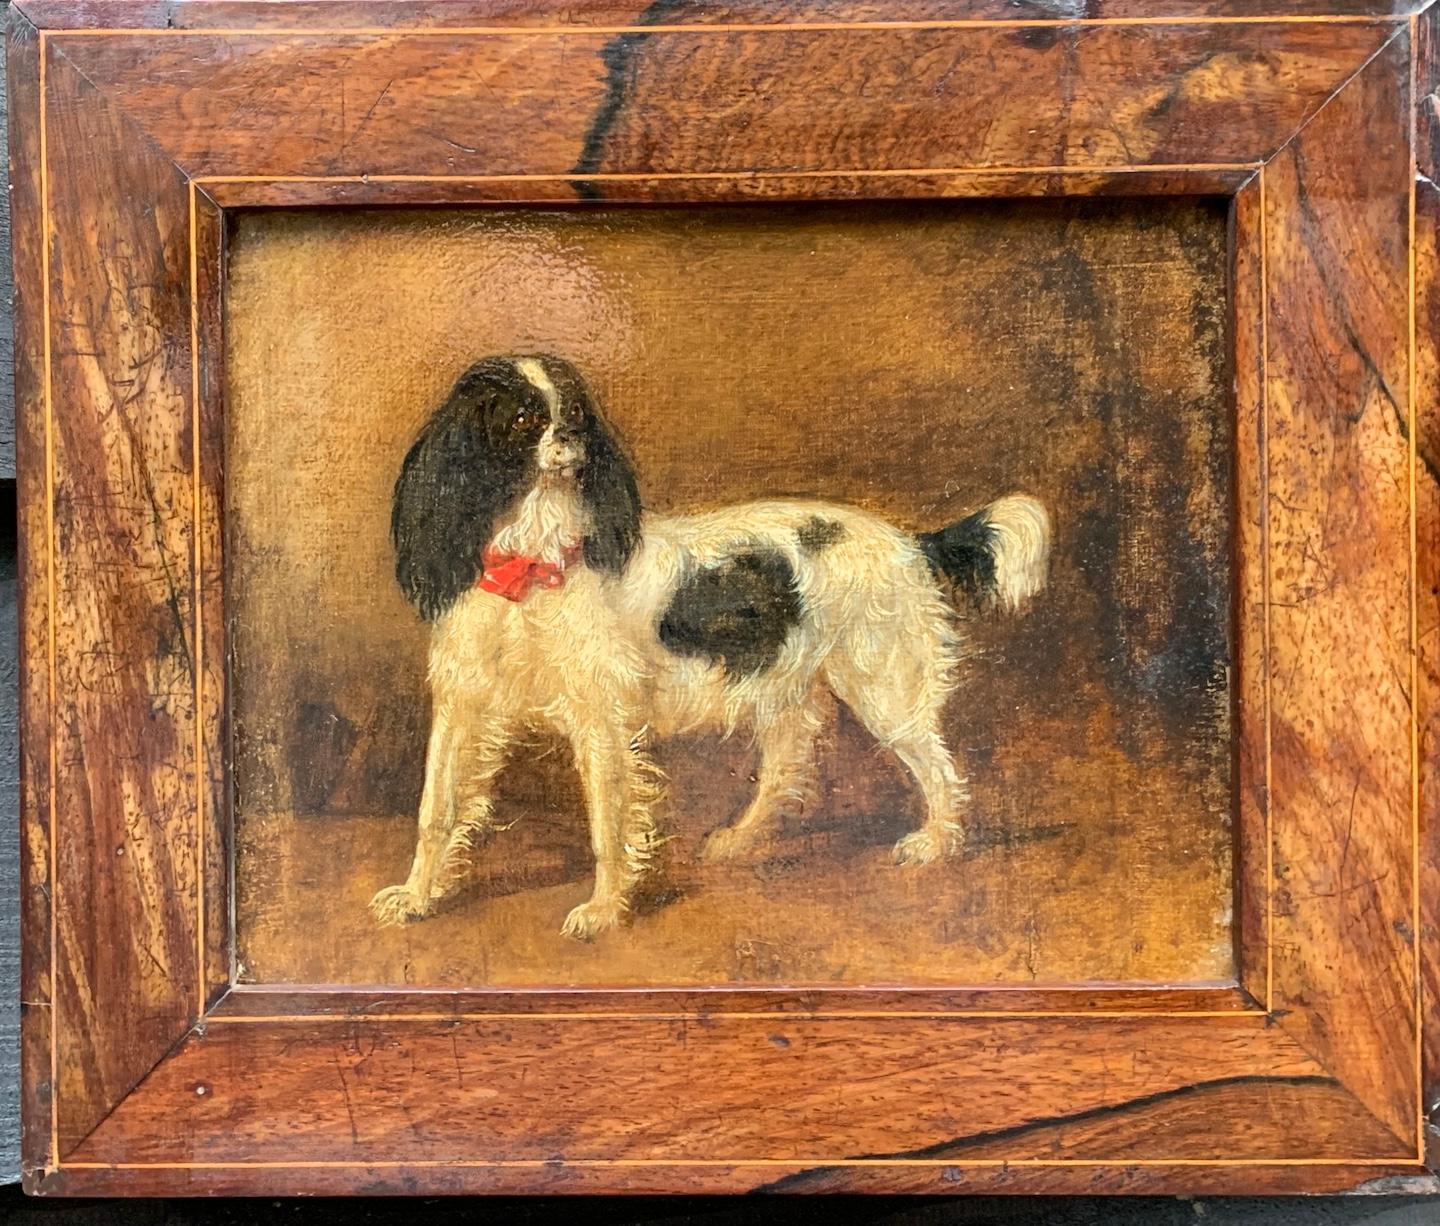 19th Century English School Animal Painting - Early 19th century Antique Portrait of a King Charles Cavalier Spaniel dog 